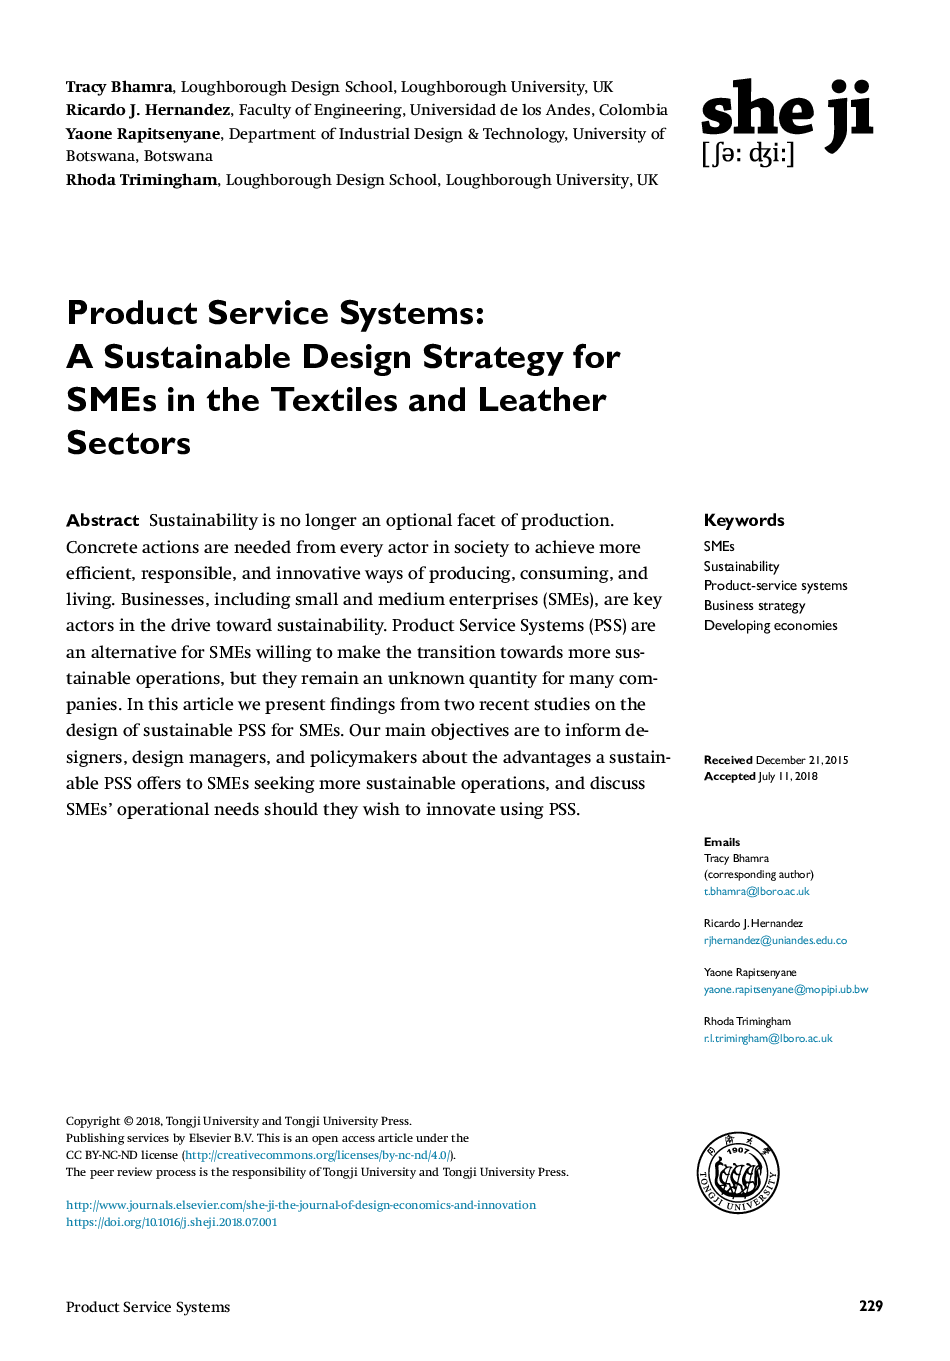 Product Service Systems: A Sustainable Design Strategy for SMEs in the Textiles and Leather Sectors